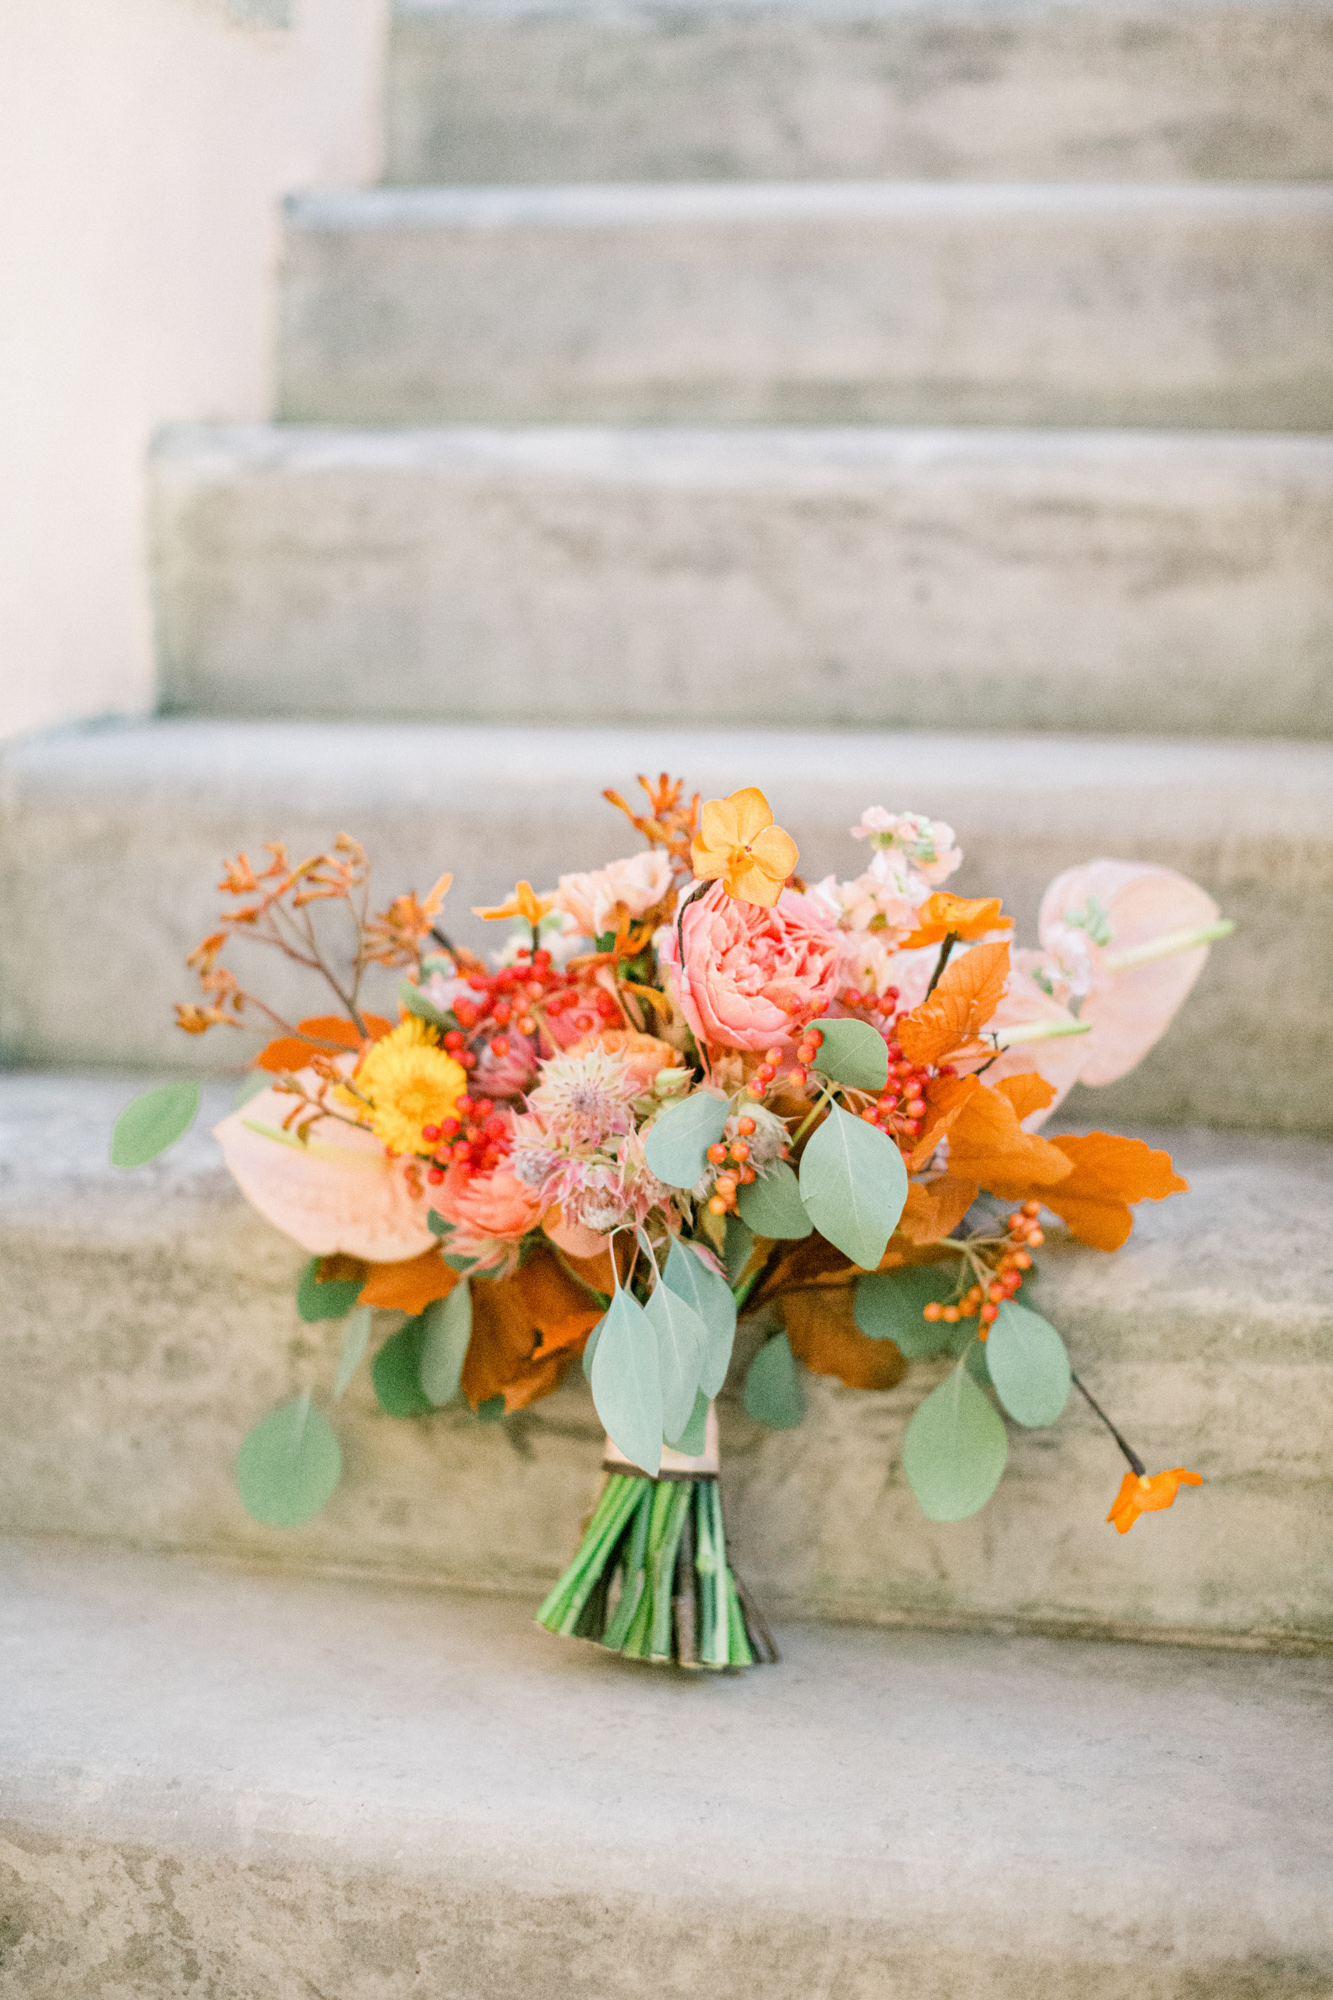 Modern bridal flowers bouquet for a sunset wedding editorial in Grecotel Agreco Farms Crete Greece as published on Ruffled blog.